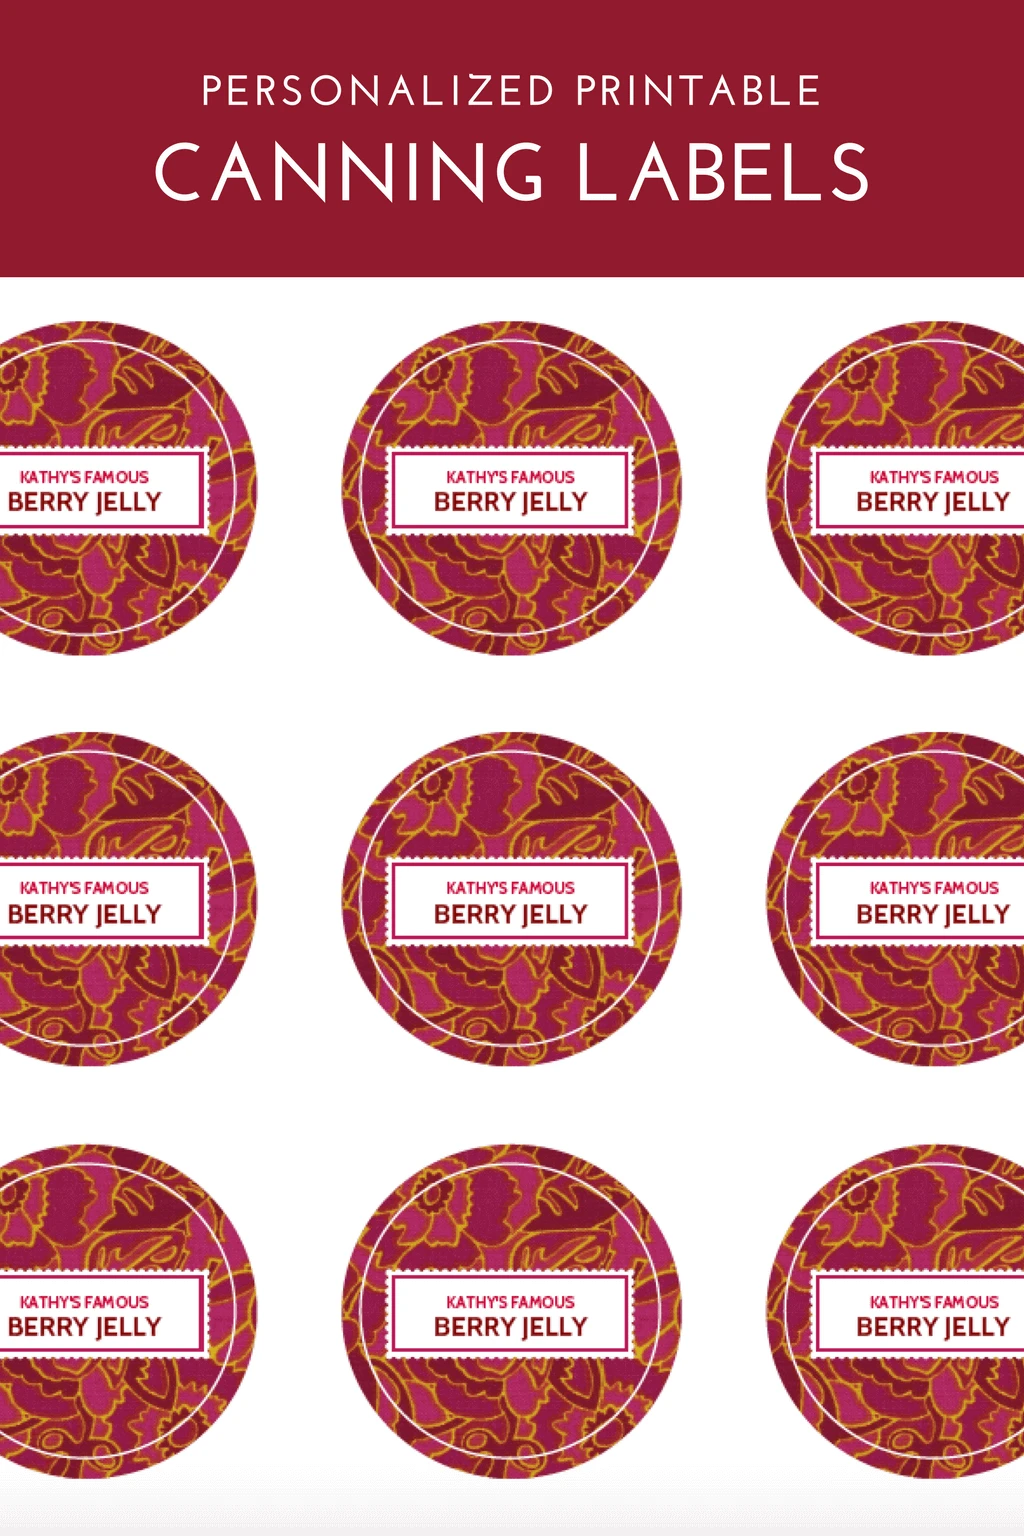 Personalized printable canning labels in red. Type to personalize and print over and over again. Great for homemade jams, jellies, and DIY gifts. #canning #stickers #printable #labels #jam #jelly #masonjar